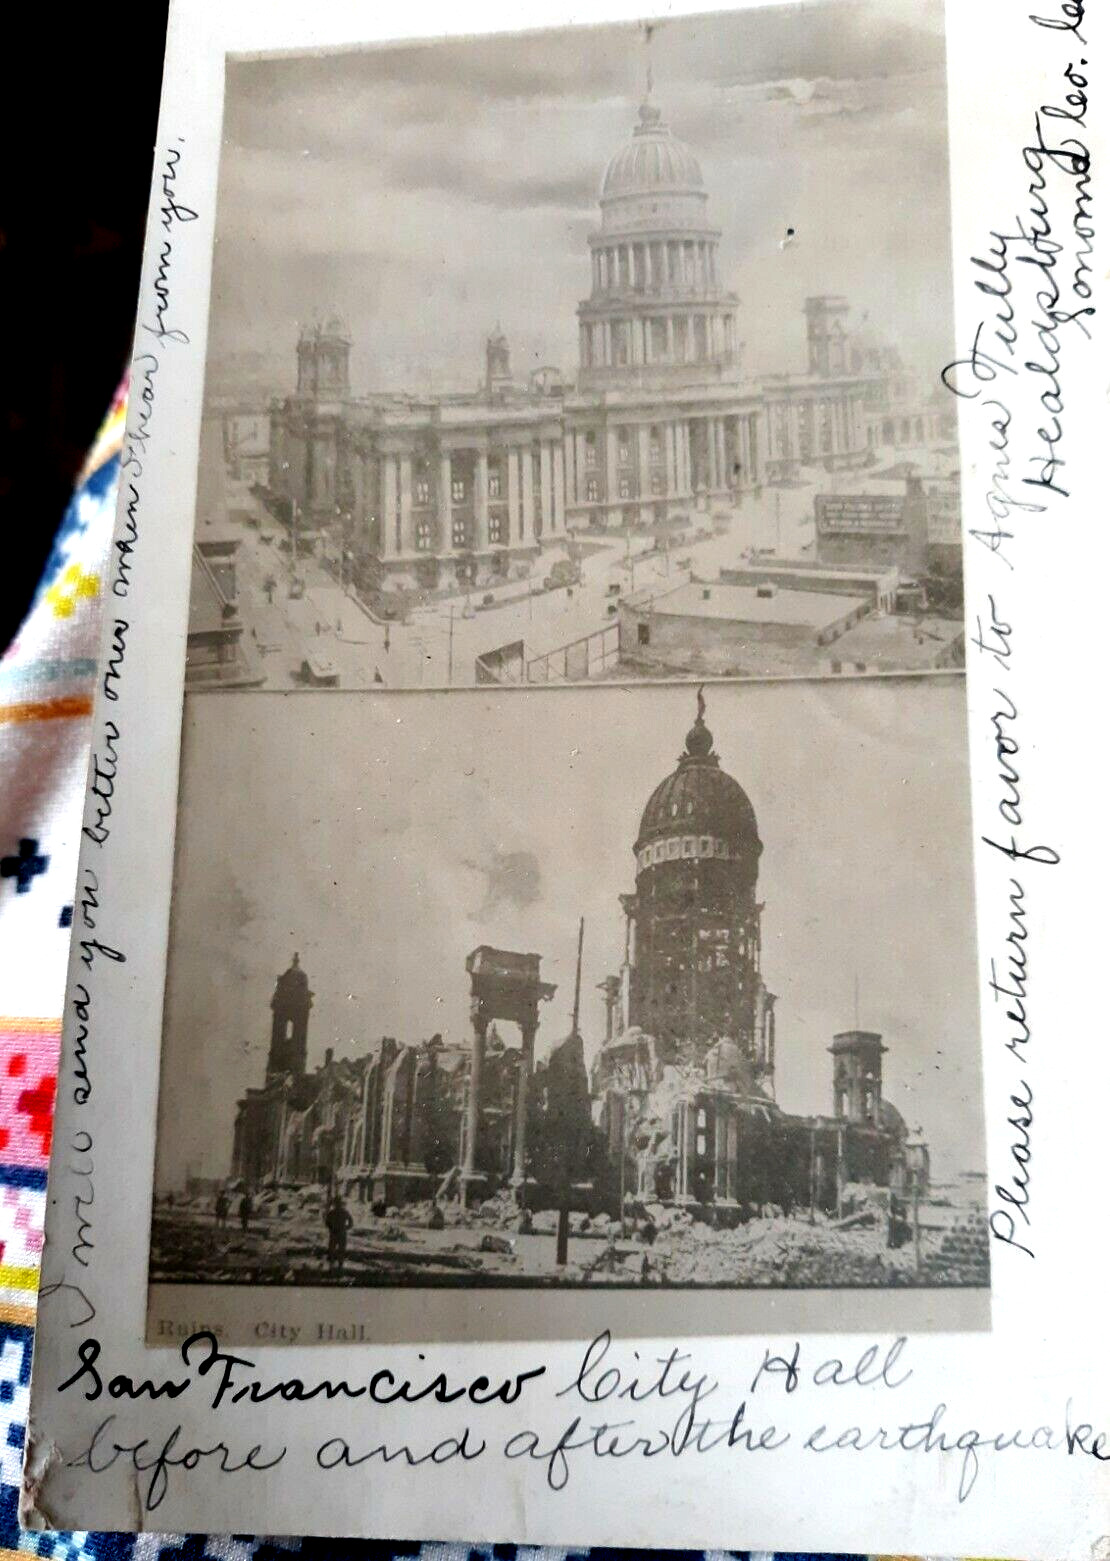 San Francisco City Hall 1908 earthquake photo before and after rppc